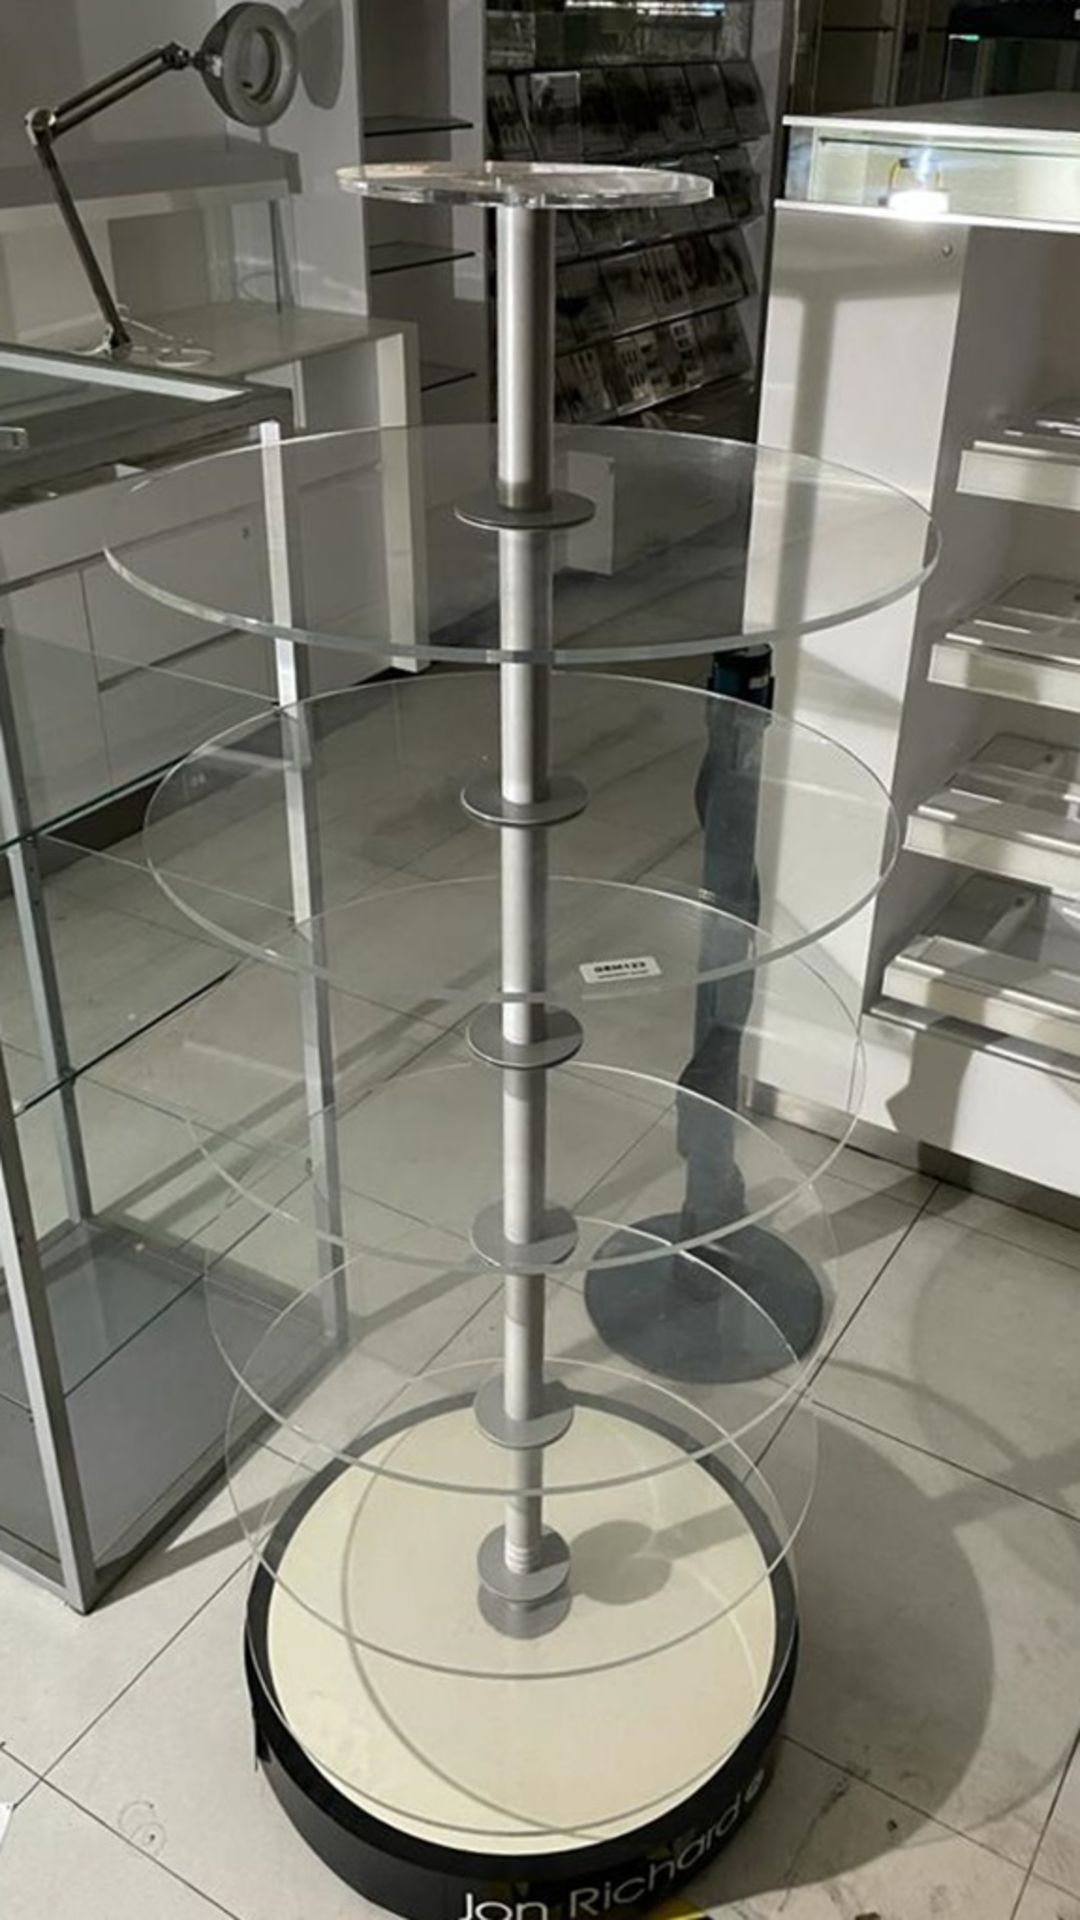 1 x Jon Richard Carousel Display Stand With 6 Glass Shelves - Size H155 x W59 cms - CL670 - Ref: - Image 4 of 4